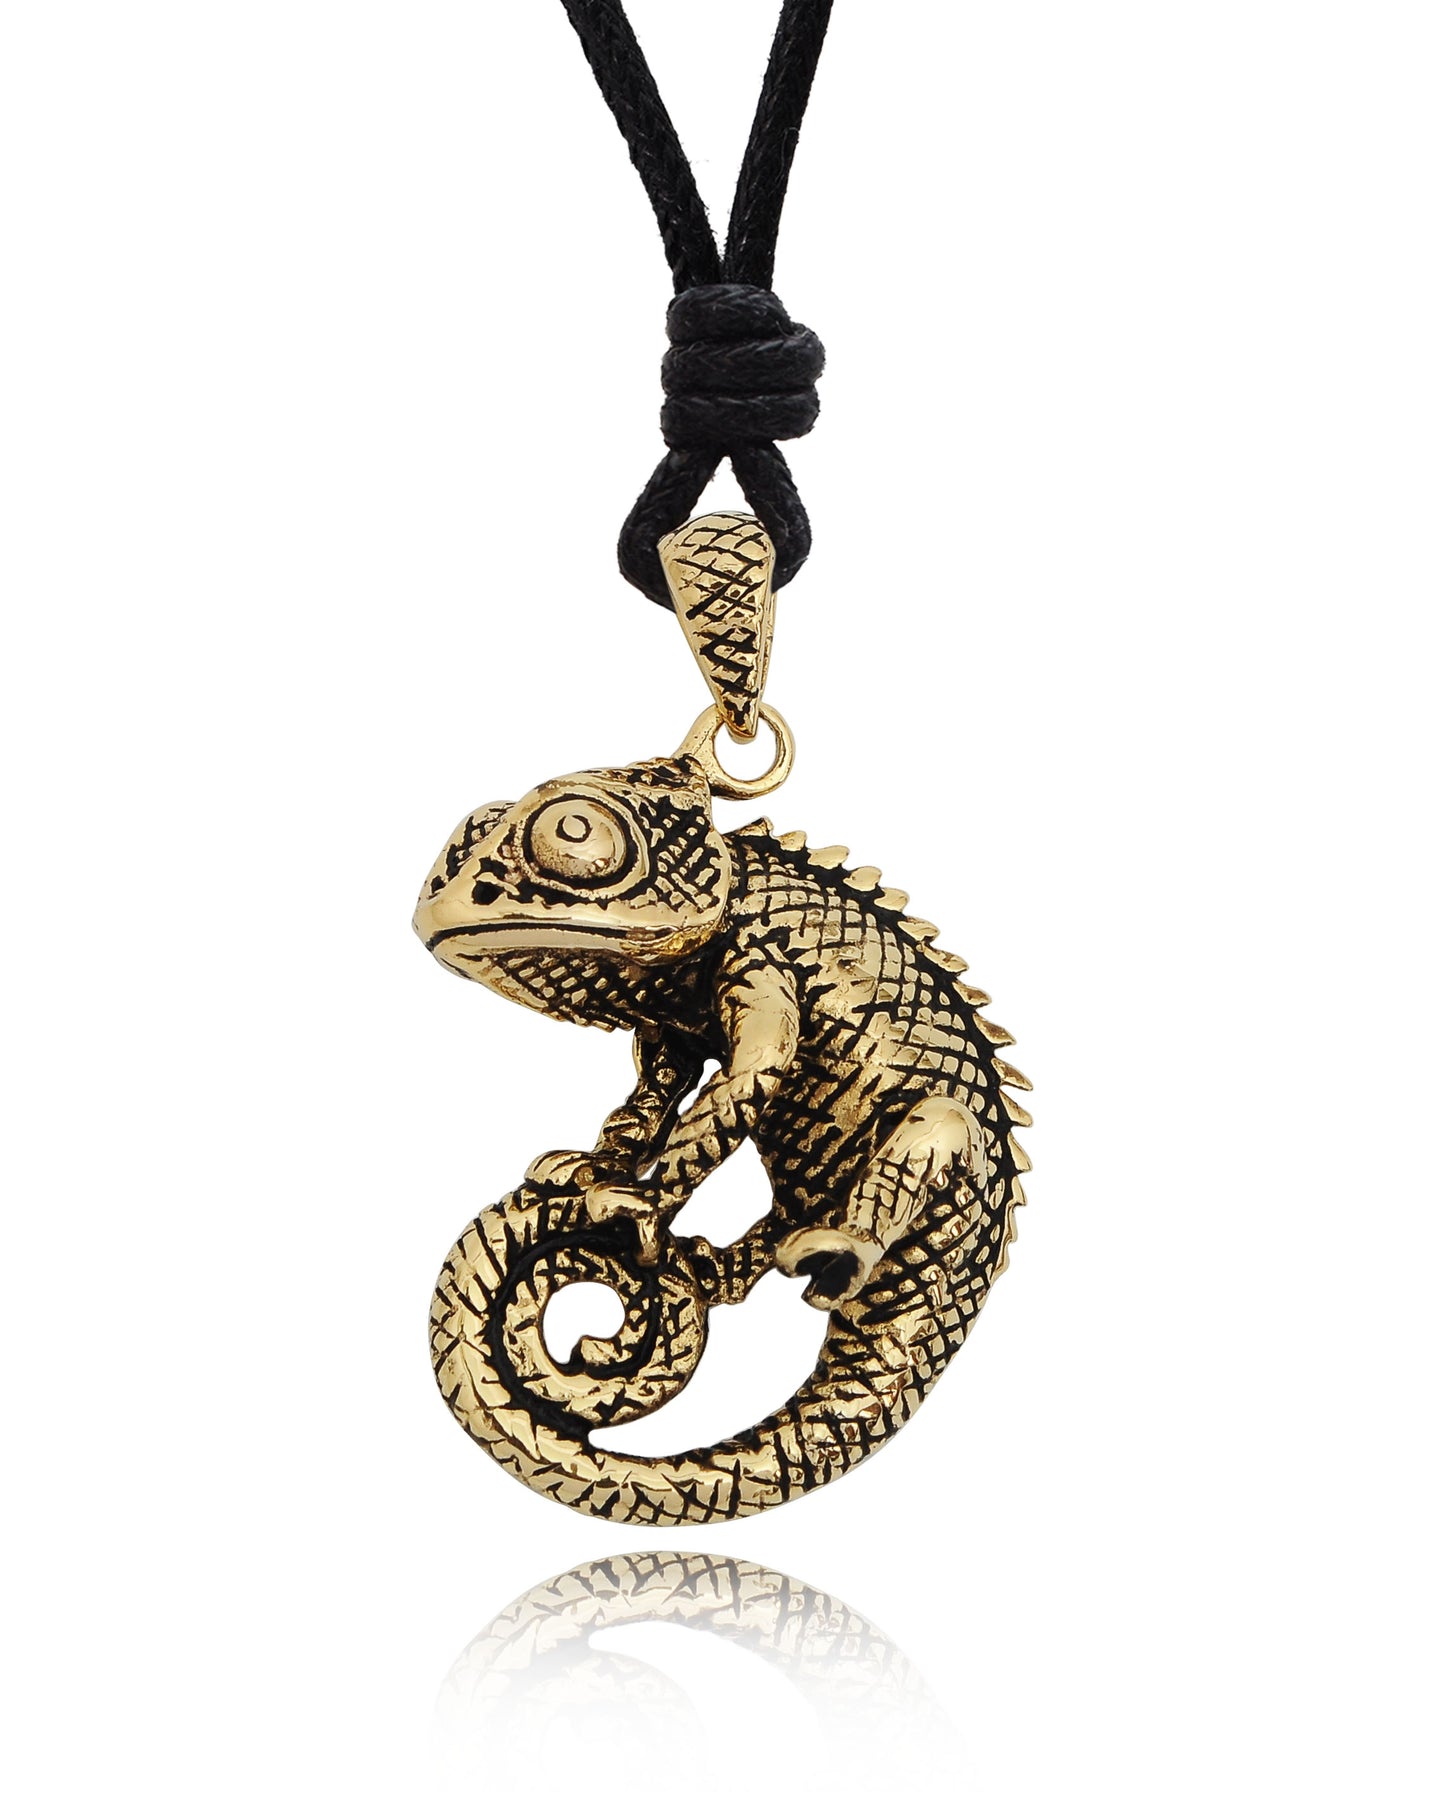 New Lizard Reptile 92.5 Sterling Silver Gold Brass Charm Necklace Pendant Jewelry